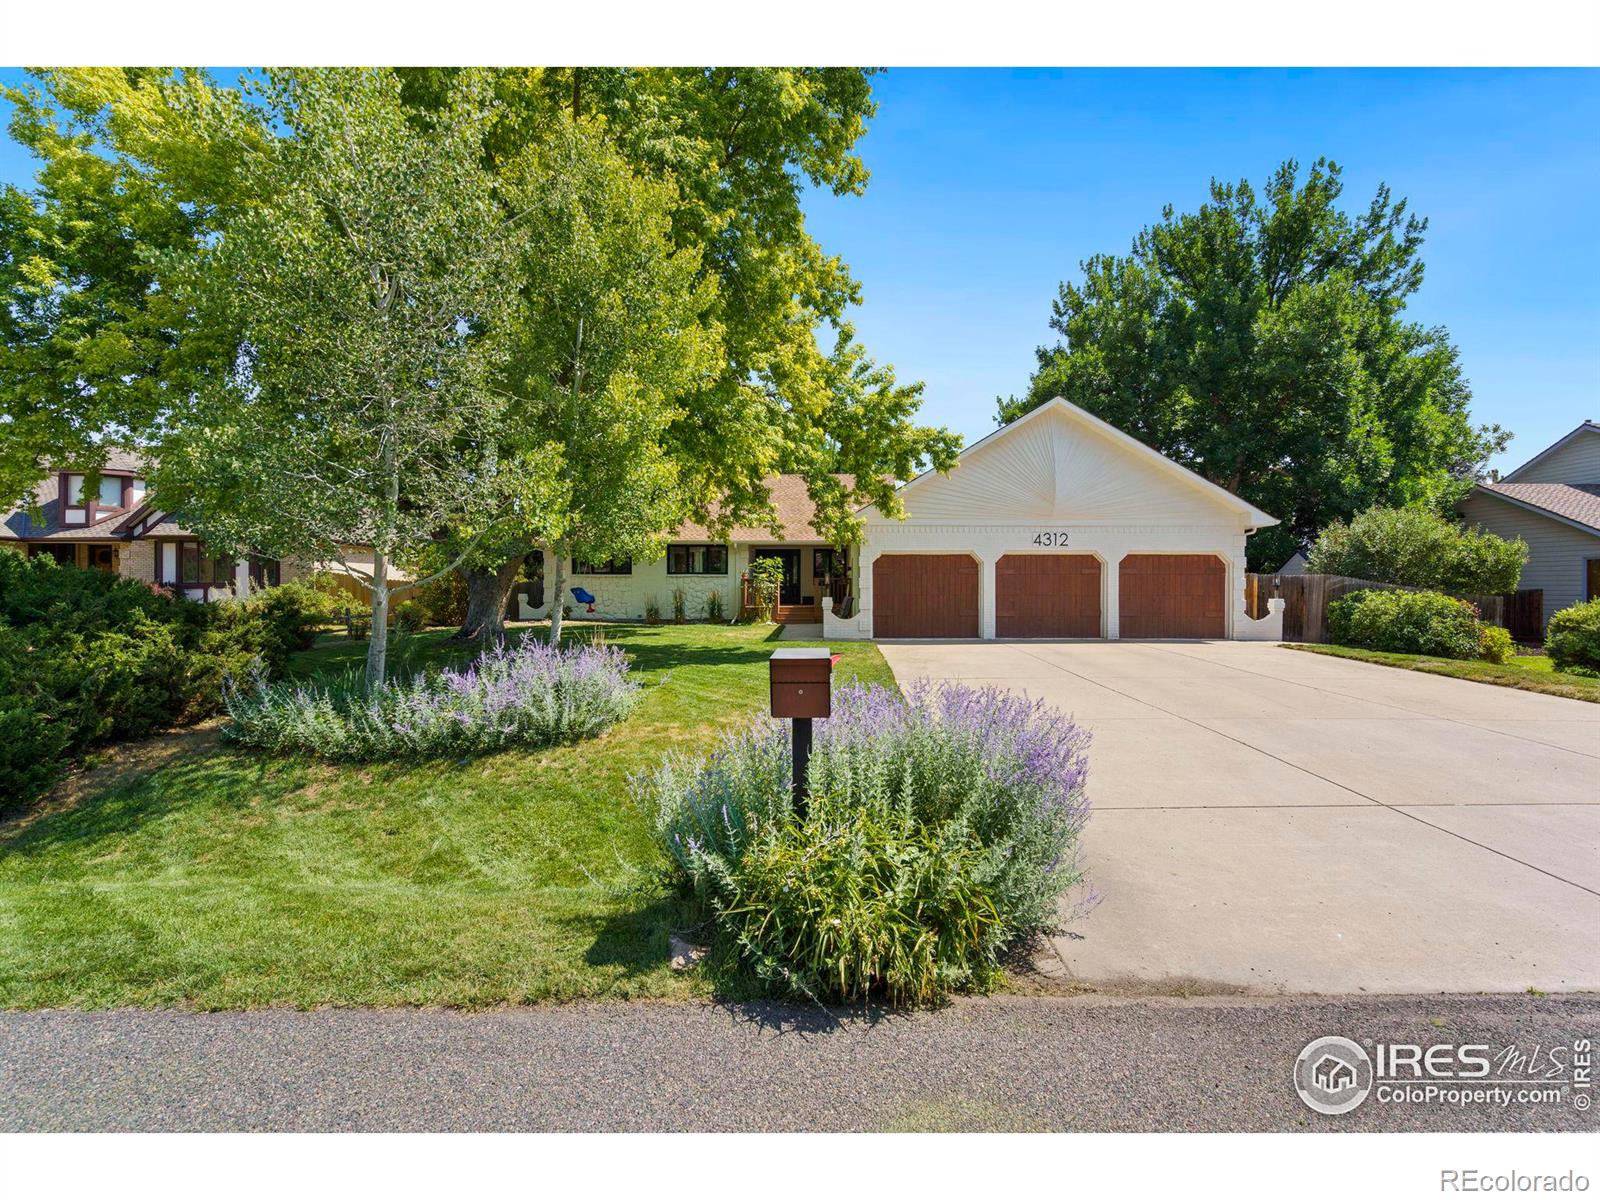 4312  Whippeny Drive, fort collins MLS: 4567891014910 Beds: 5 Baths: 3 Price: $960,000